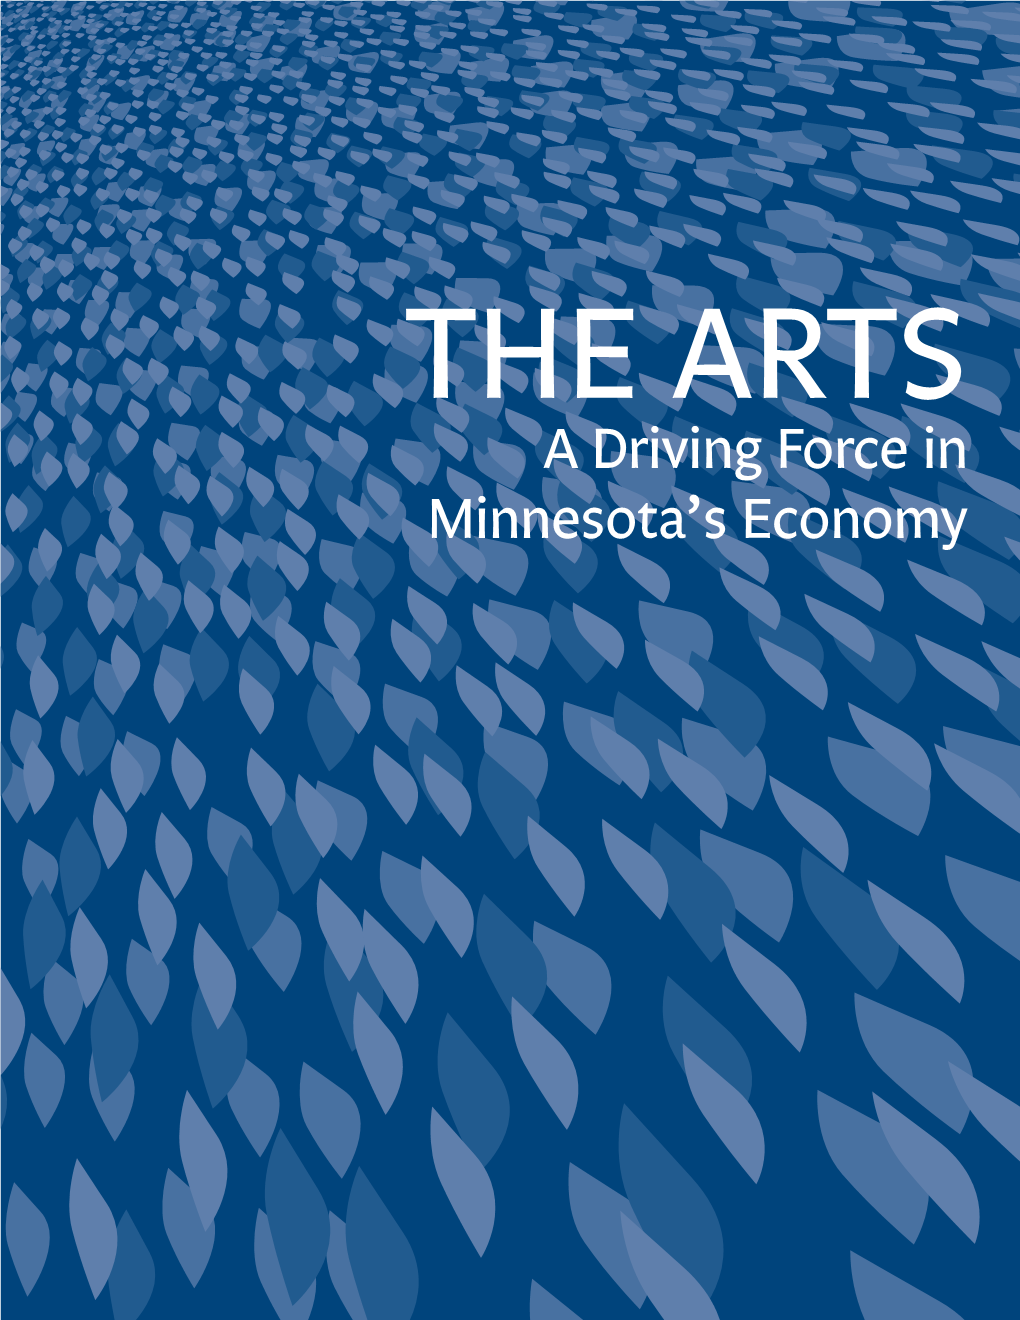 A Driving Force in Minnesota's Economy